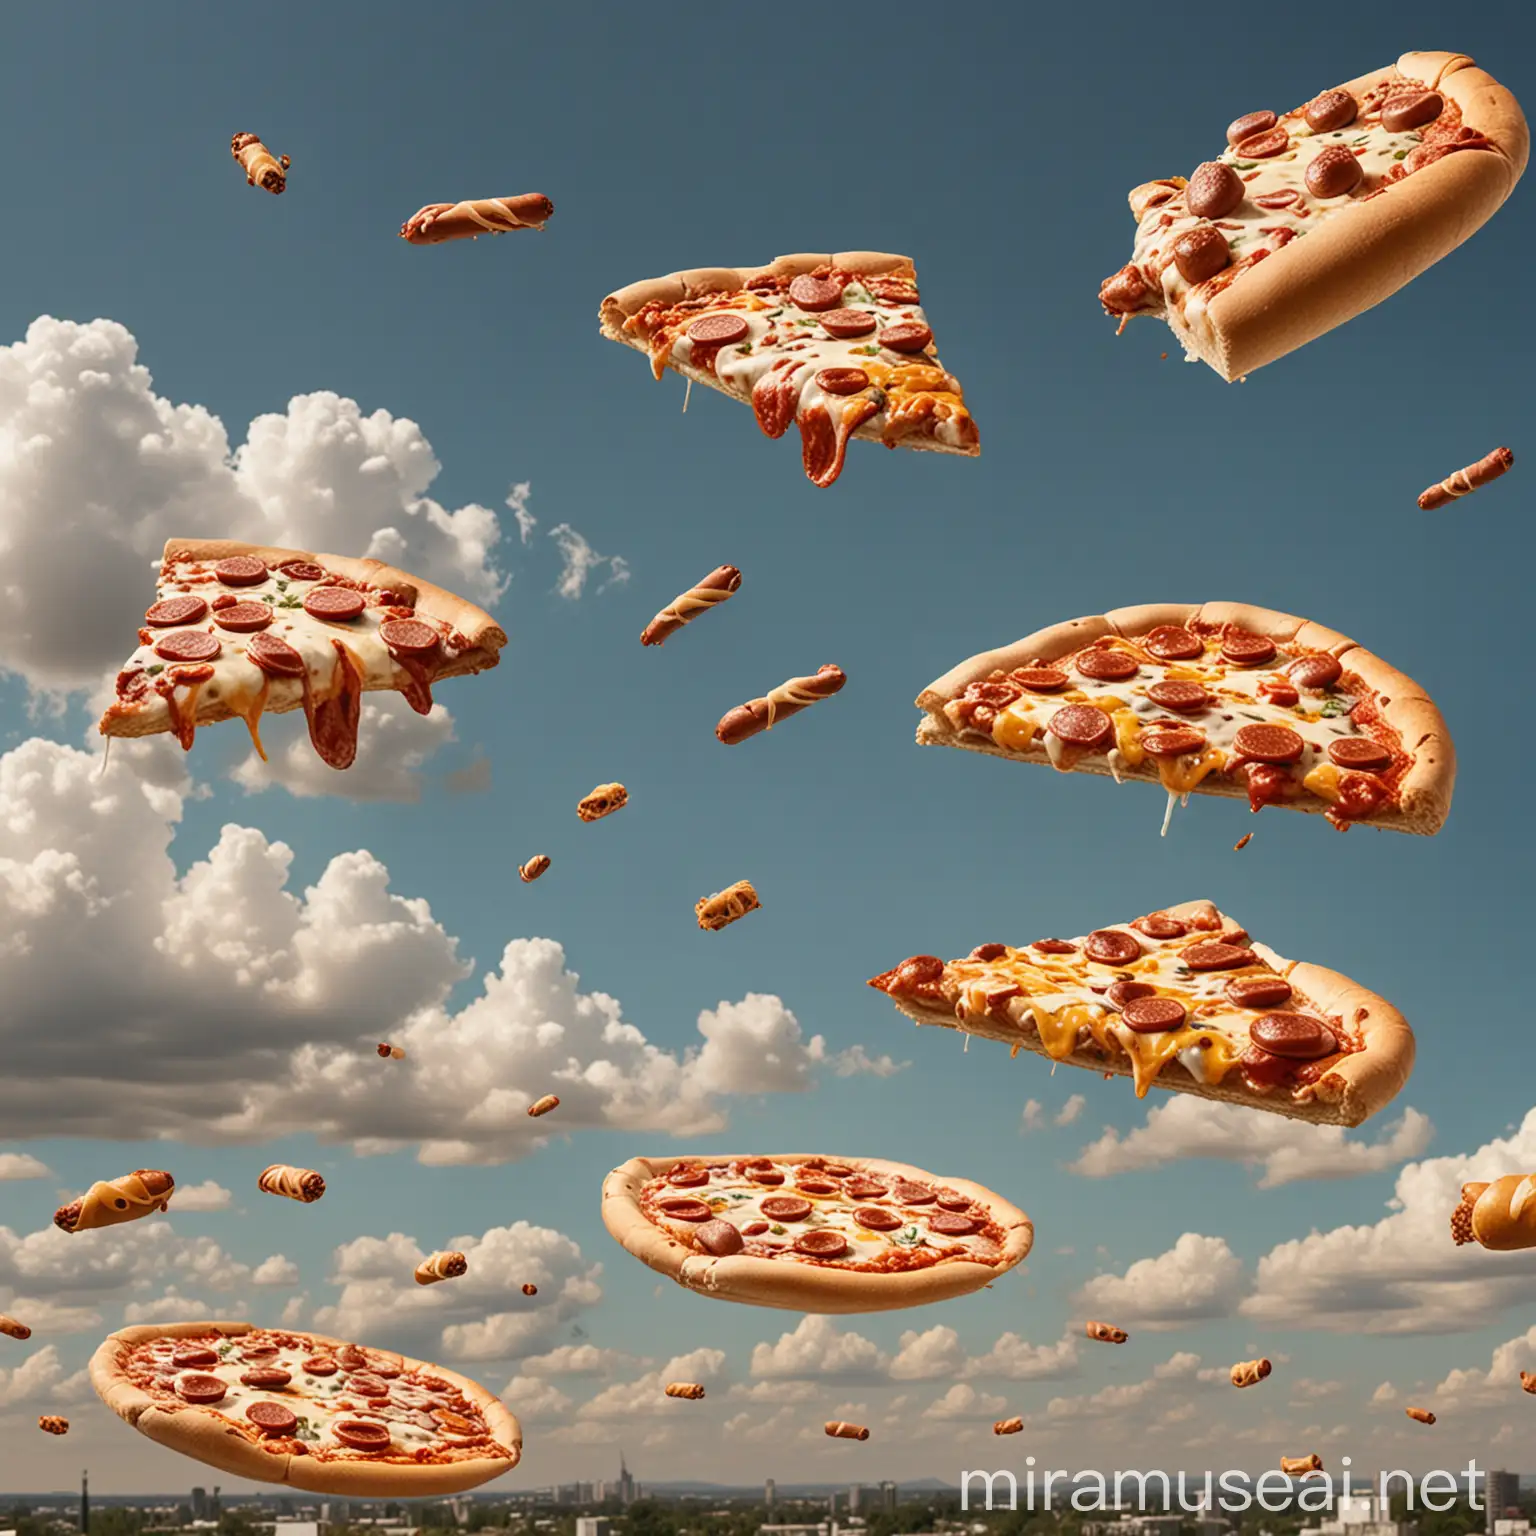 pizzas and hotdogs flying in the sky, and people are shooting at them